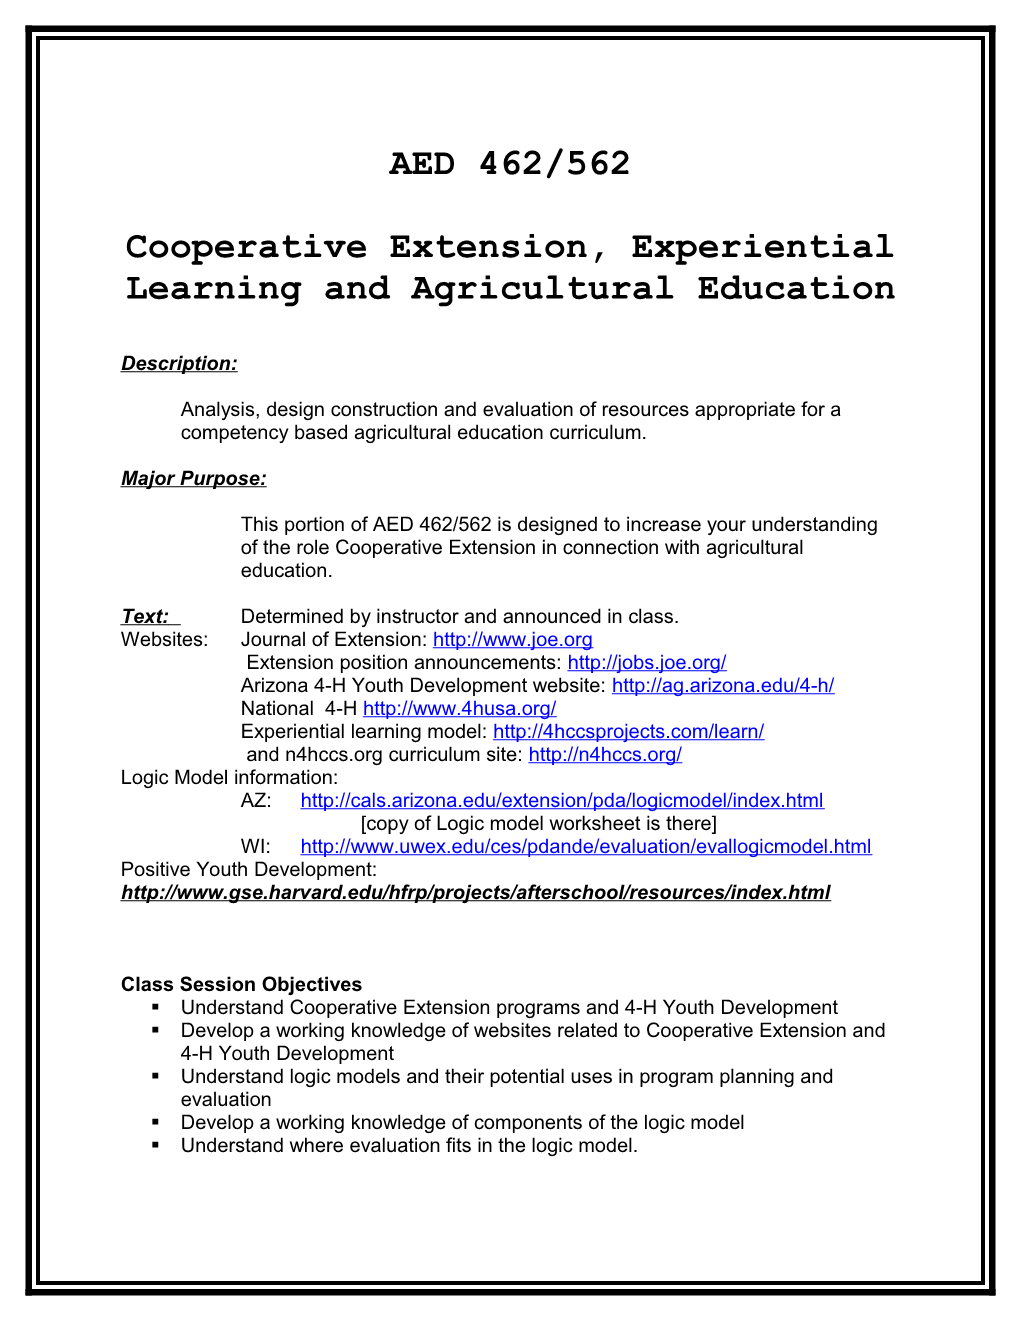 Cooperative Extension, Experiential Learning and Agricultural Education